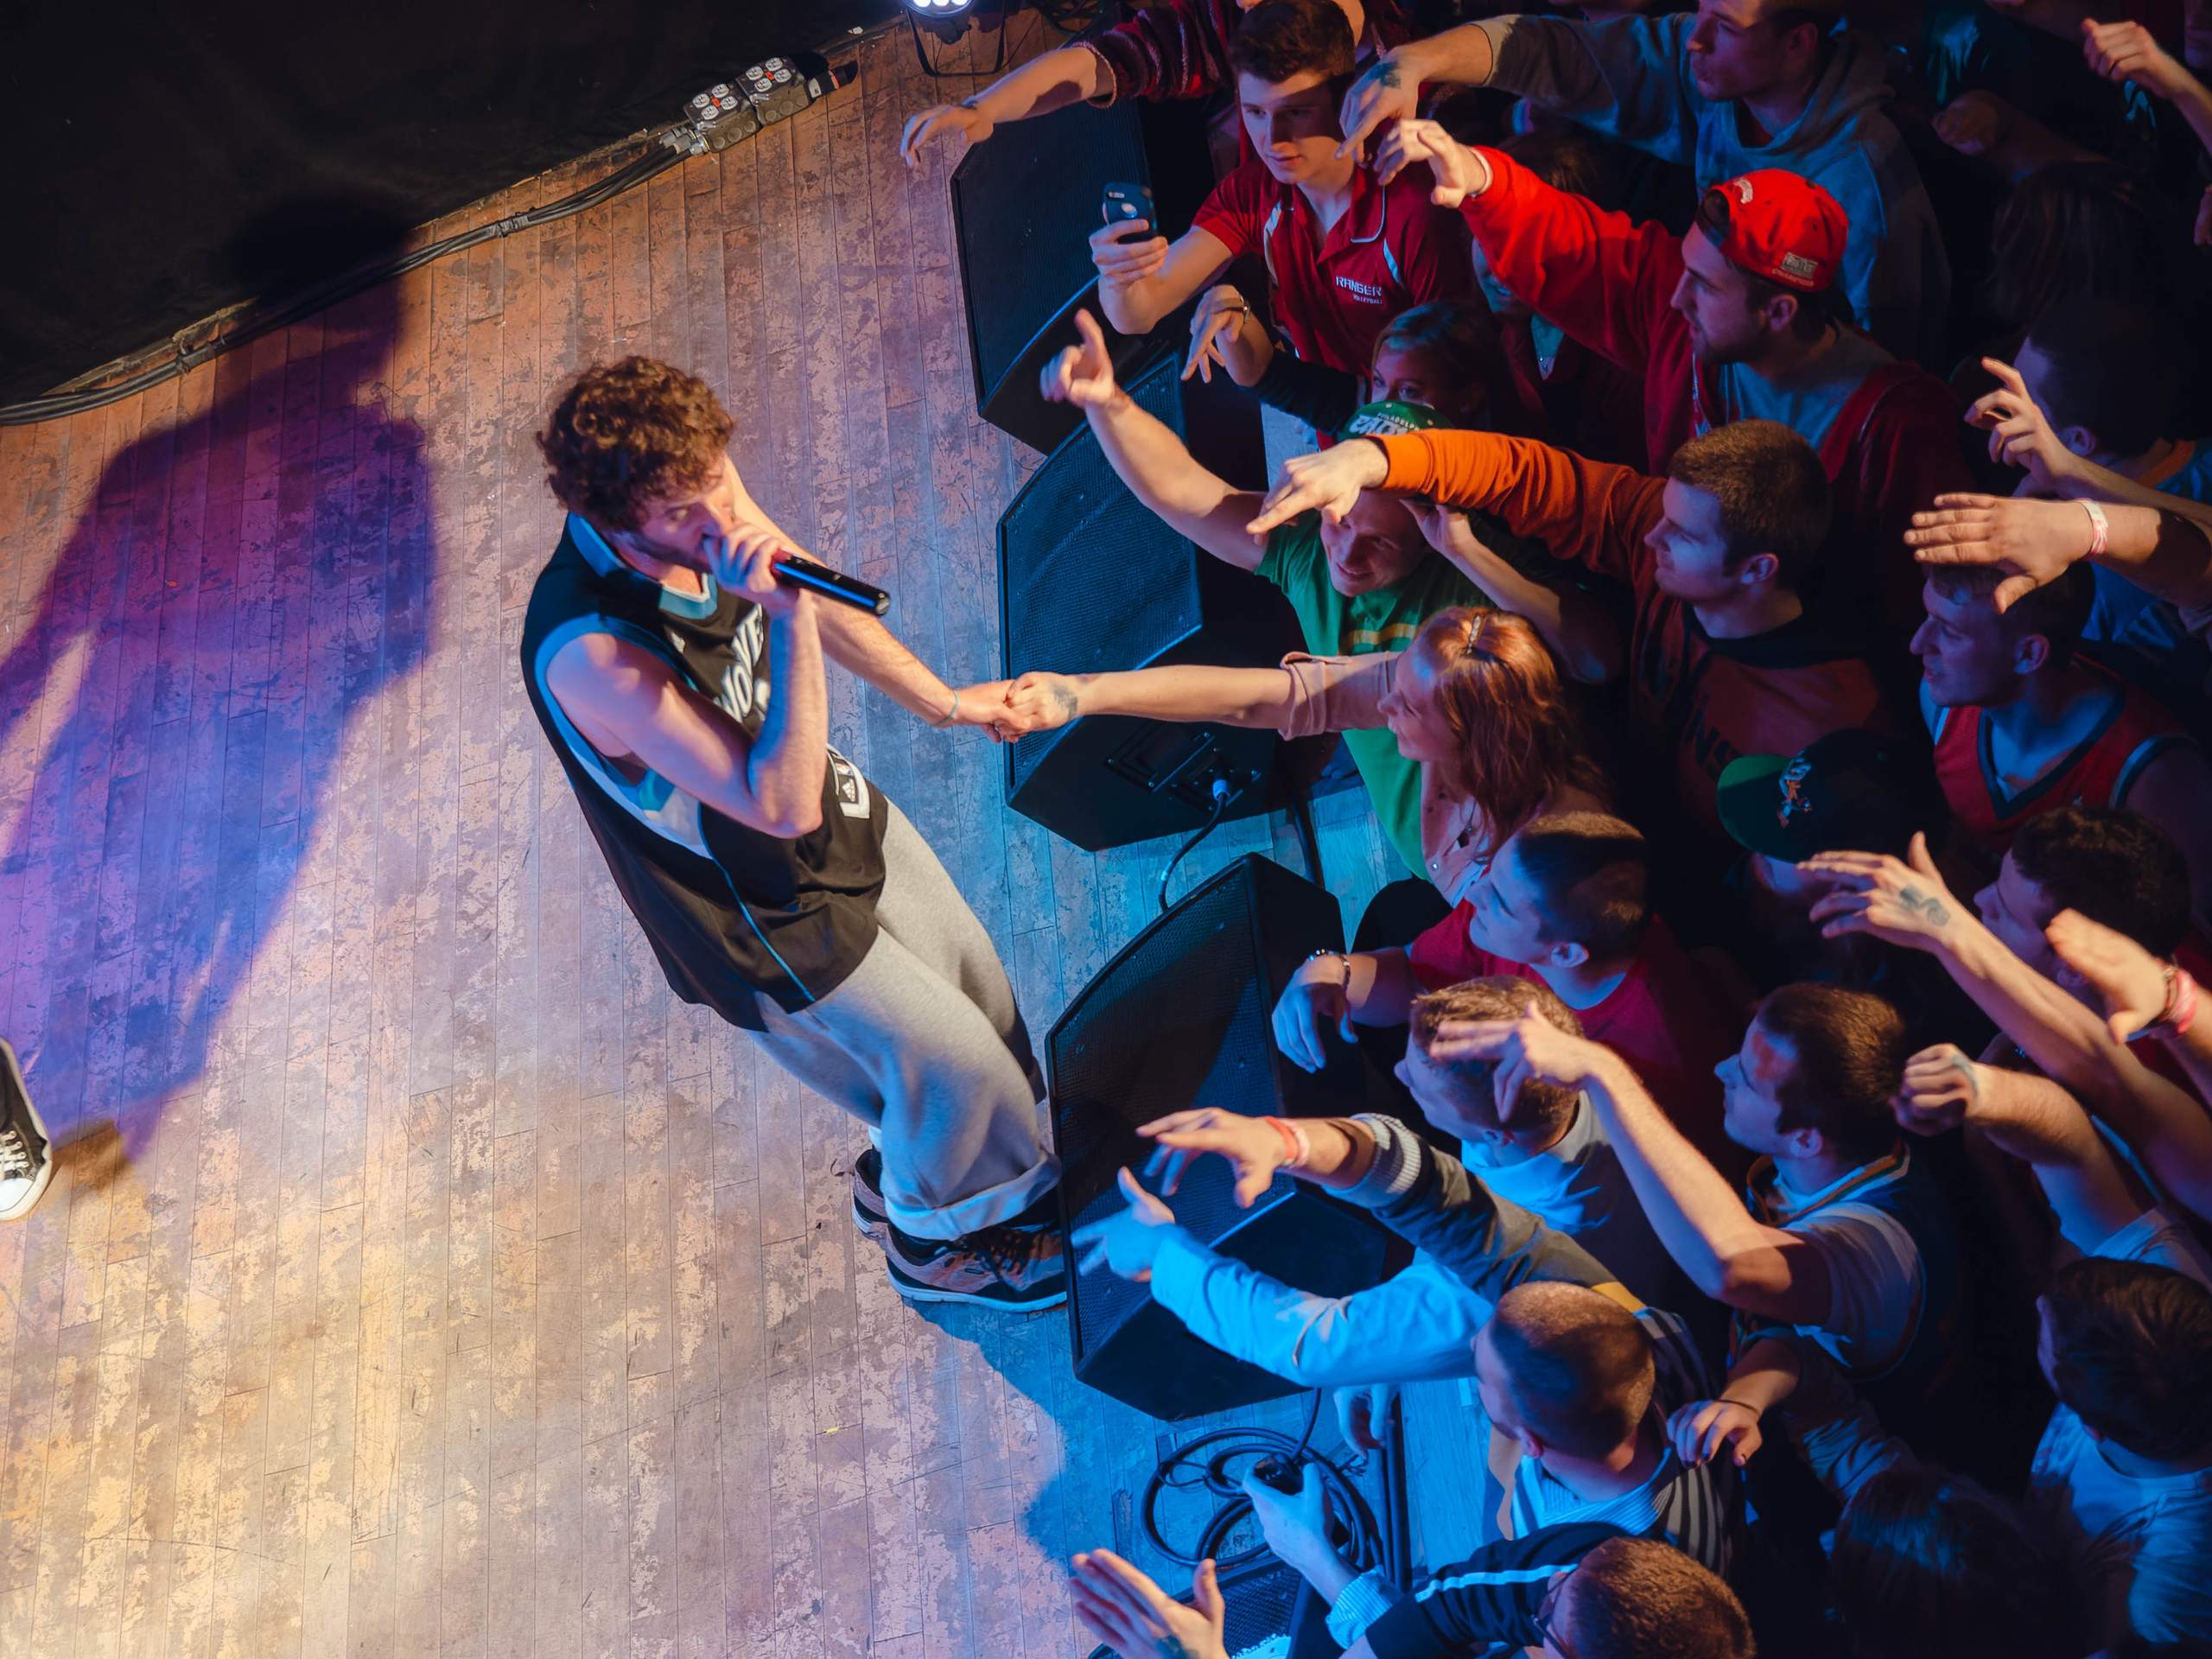 Lil Dicky performing at The Majestic in Madison, WI March 27th, 2014, photography by Ross Harried for Second Crop Music